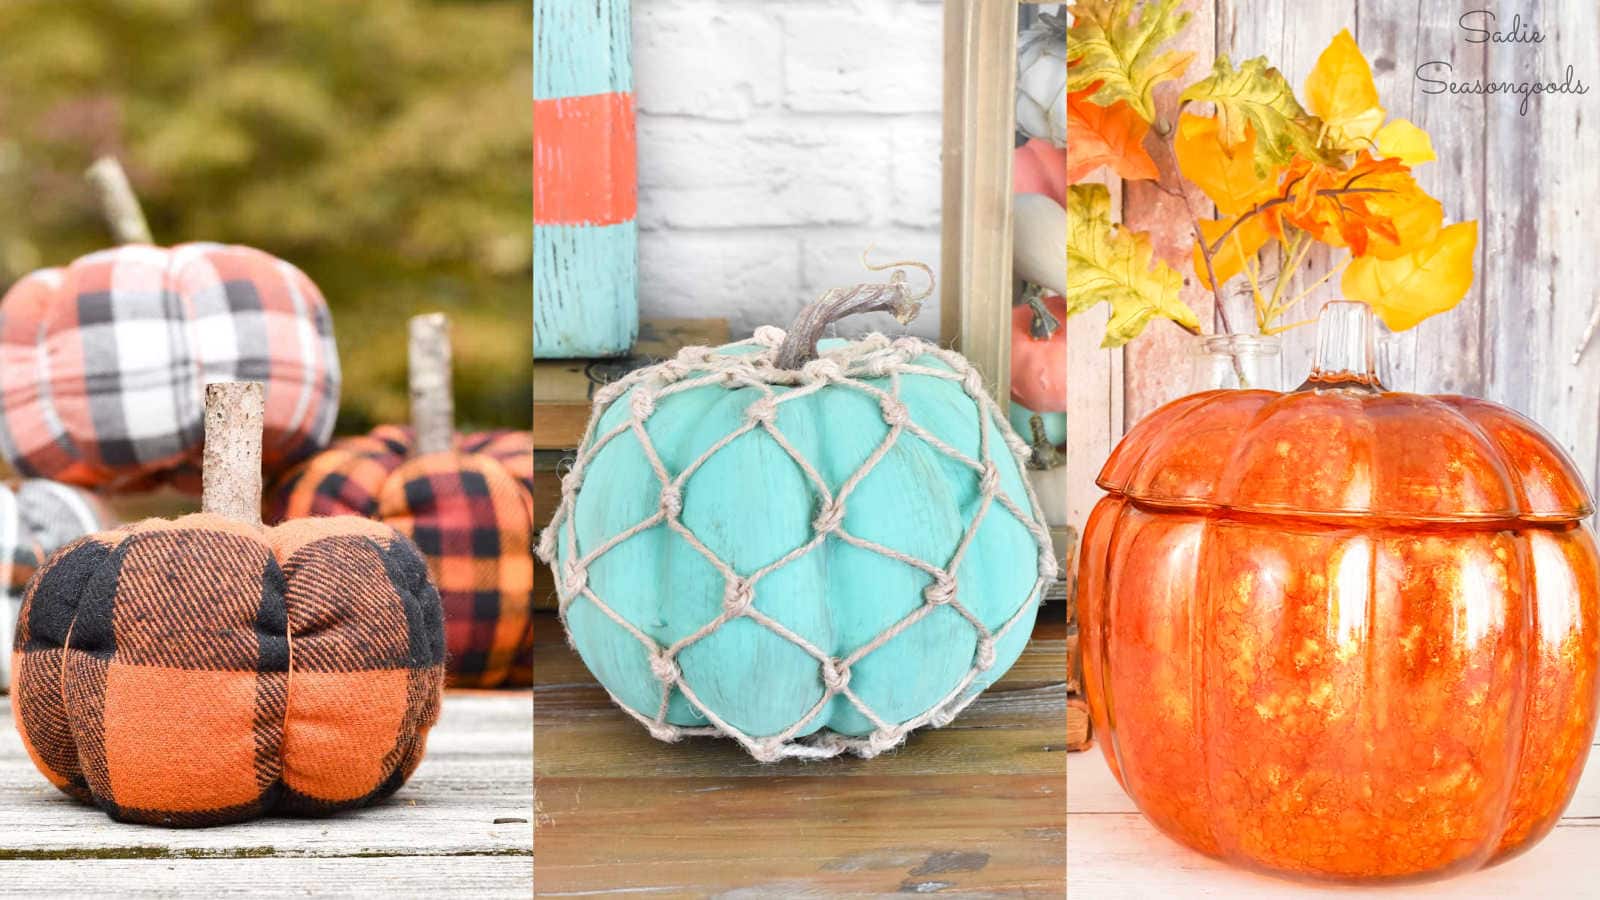 Upcycling ideas for fall pumpkins